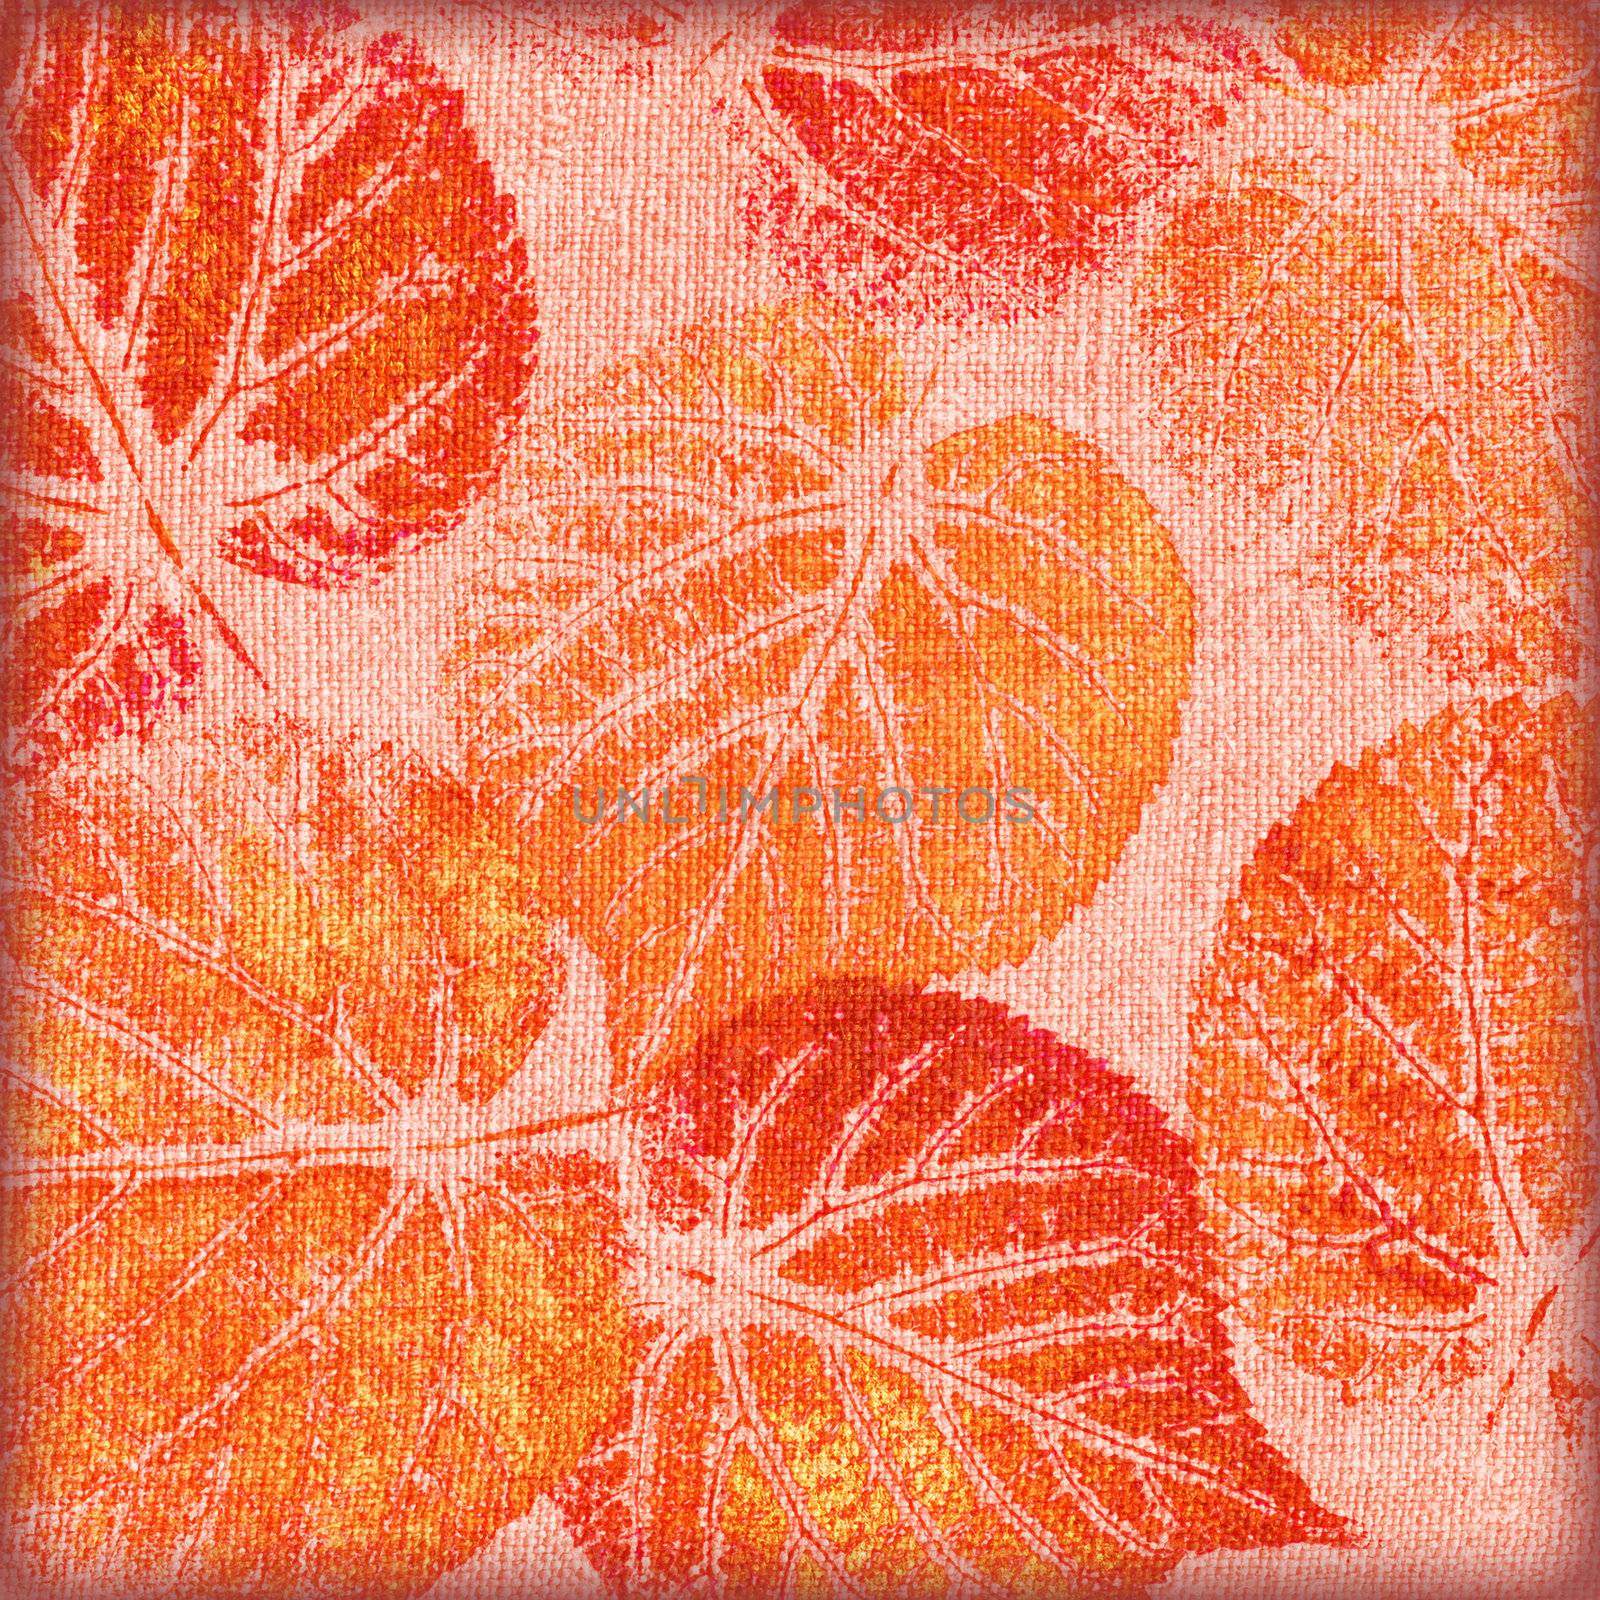 abstract background, hand draw, red and orange leaves on canvas